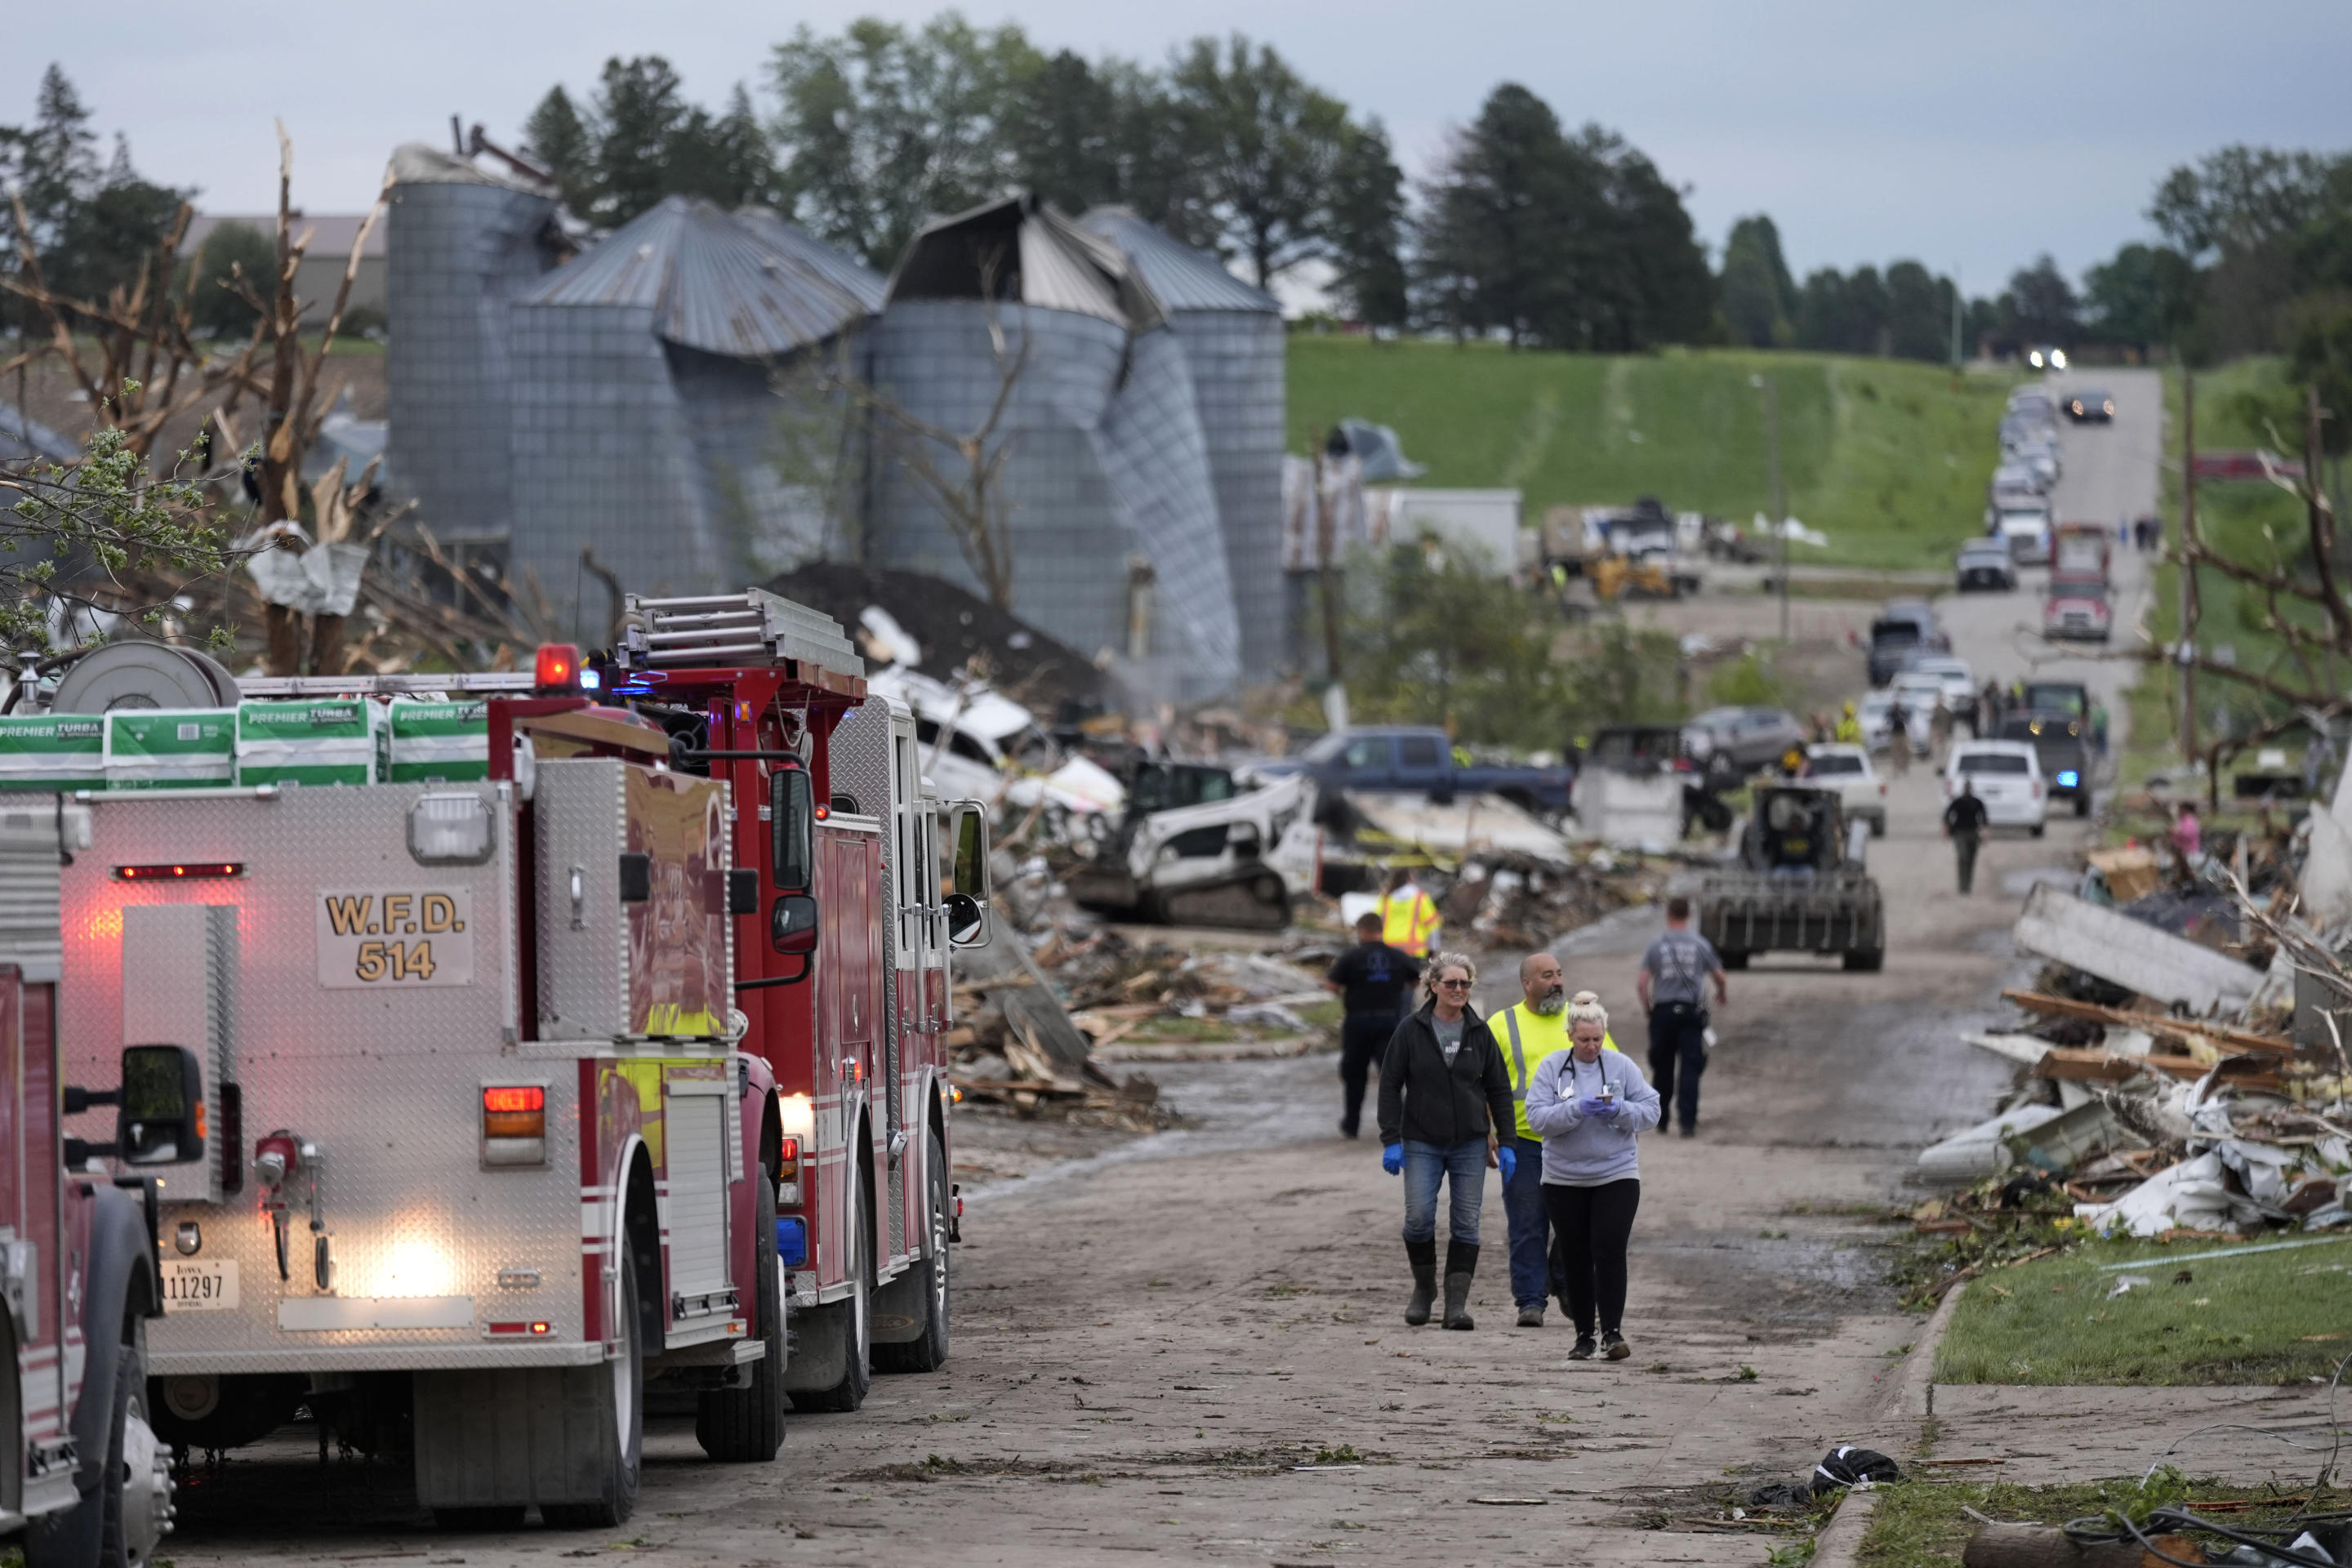 People walk down a street past damage after a tornado on Tuesday in Greenfield, Iowa.